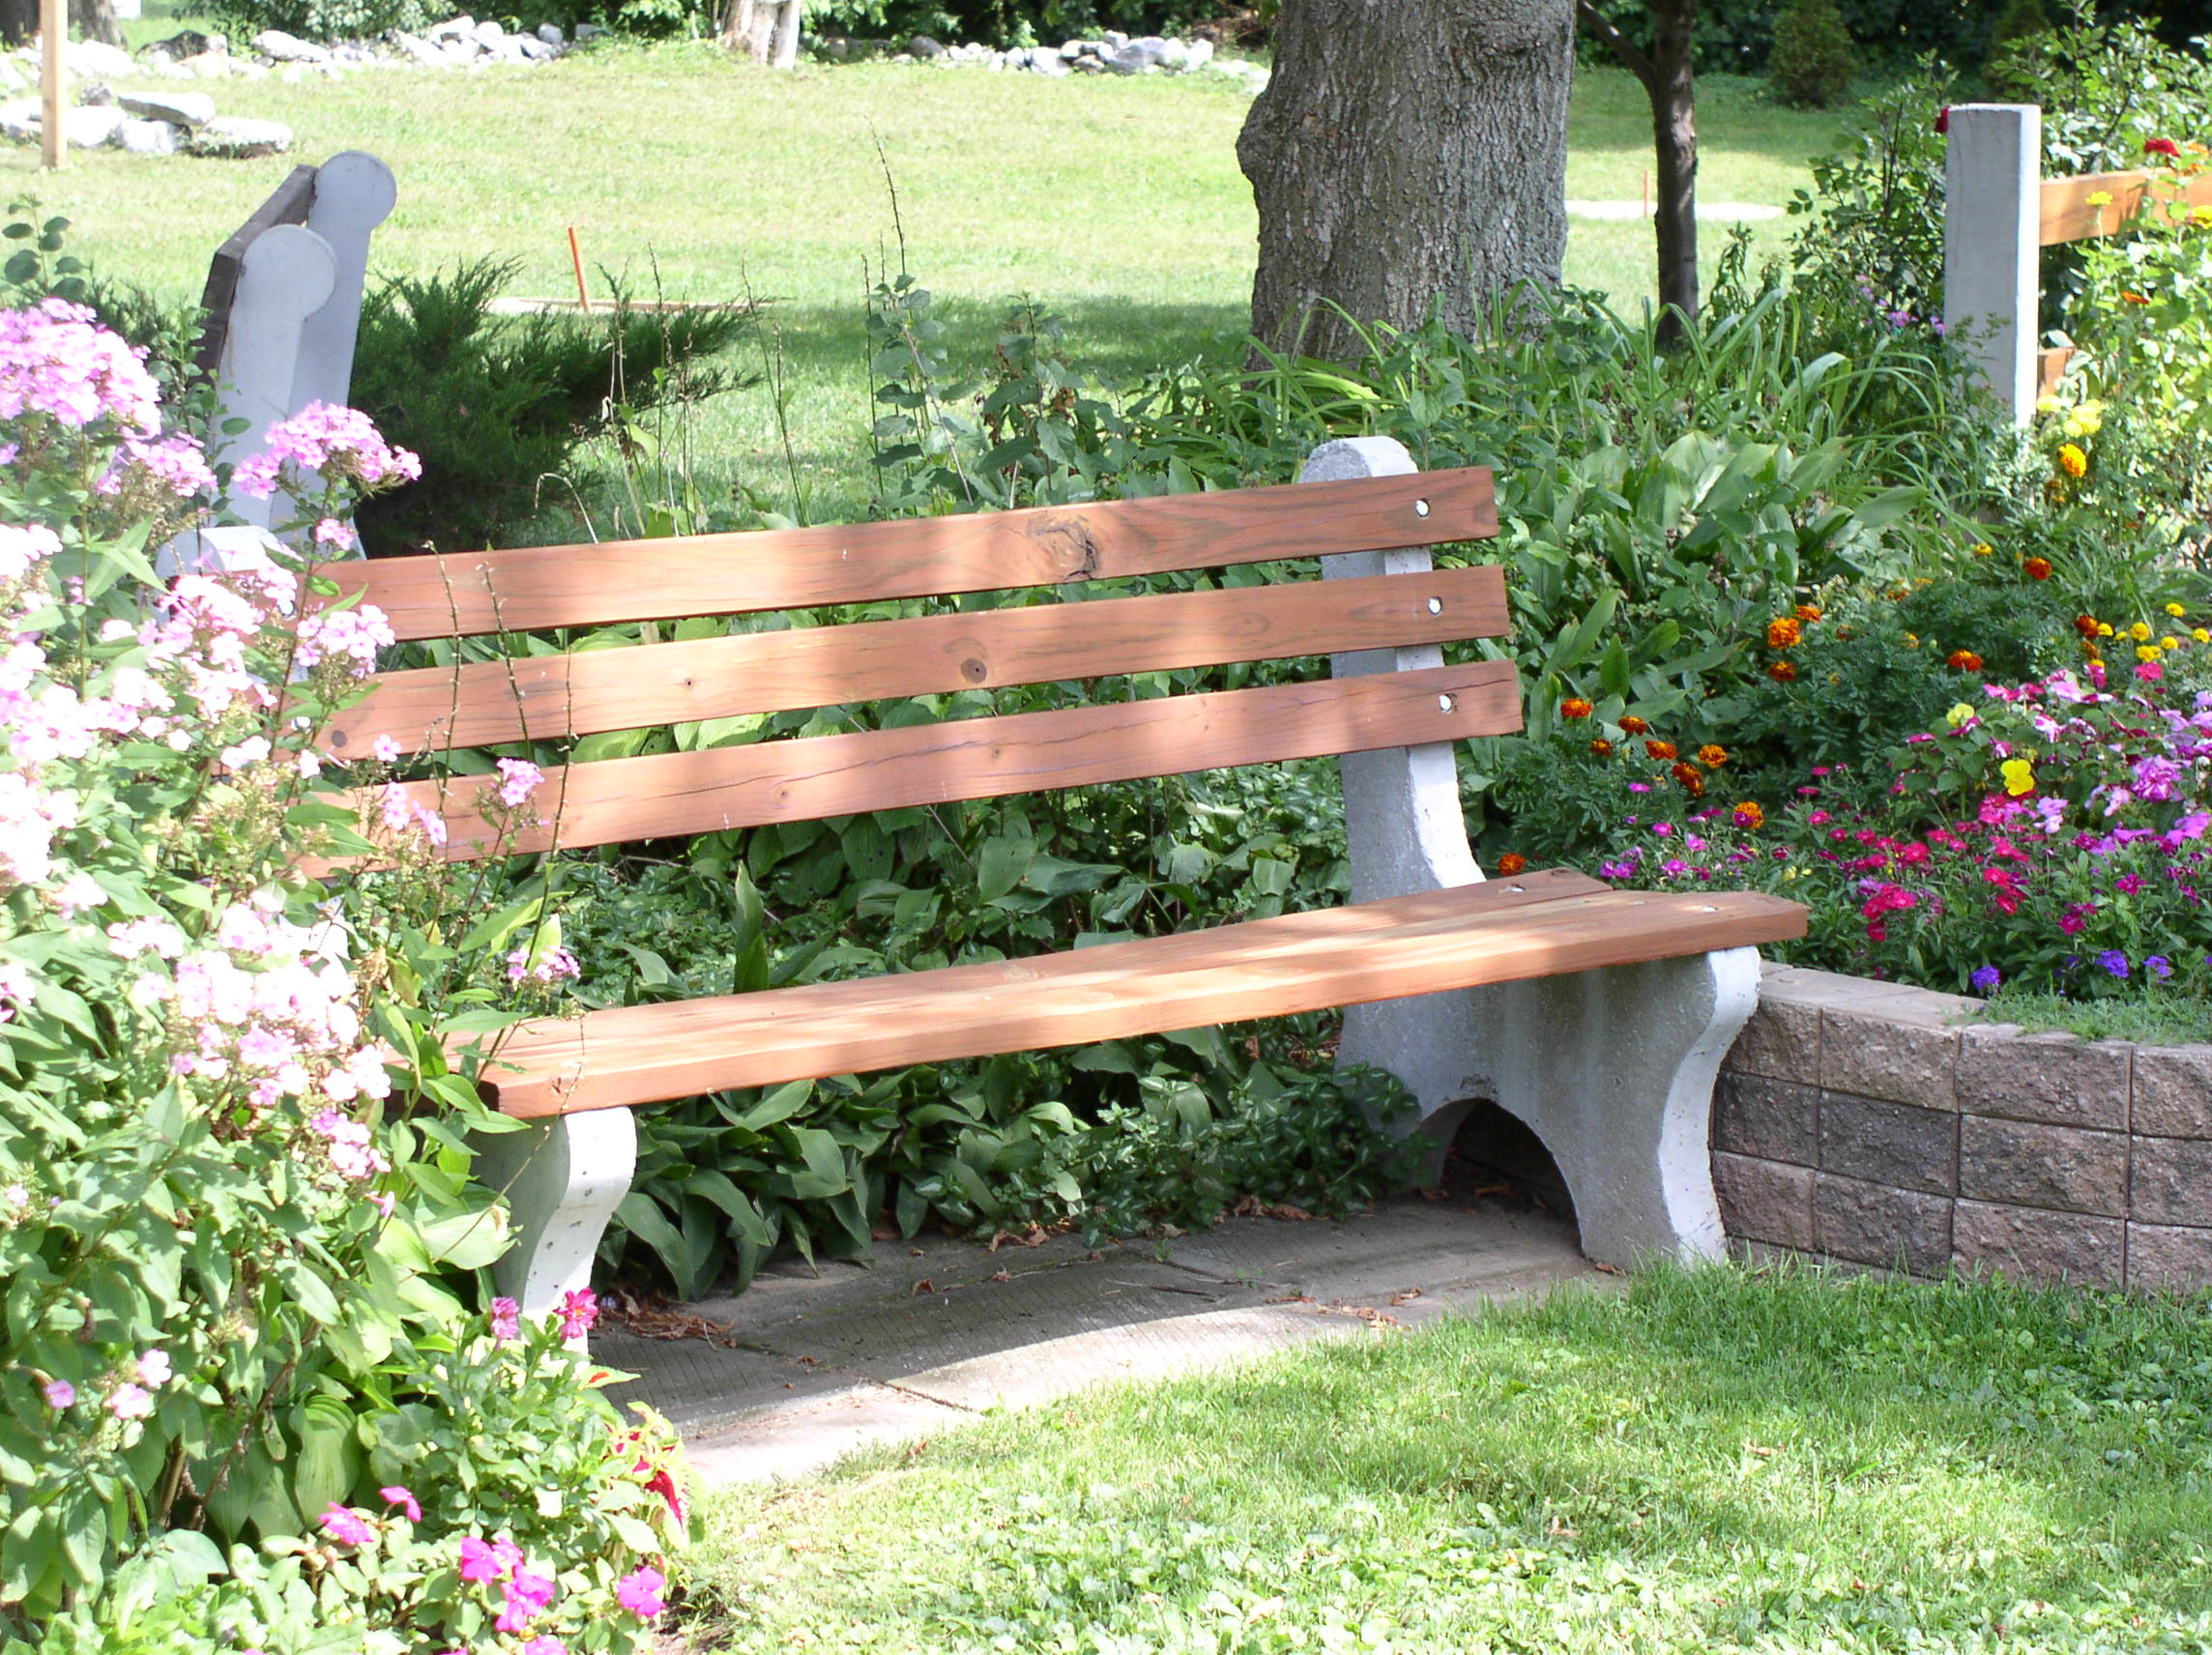 PARK BENCH Donated by: JEFFERSON CONCRETE CORP | WPBS | Serving